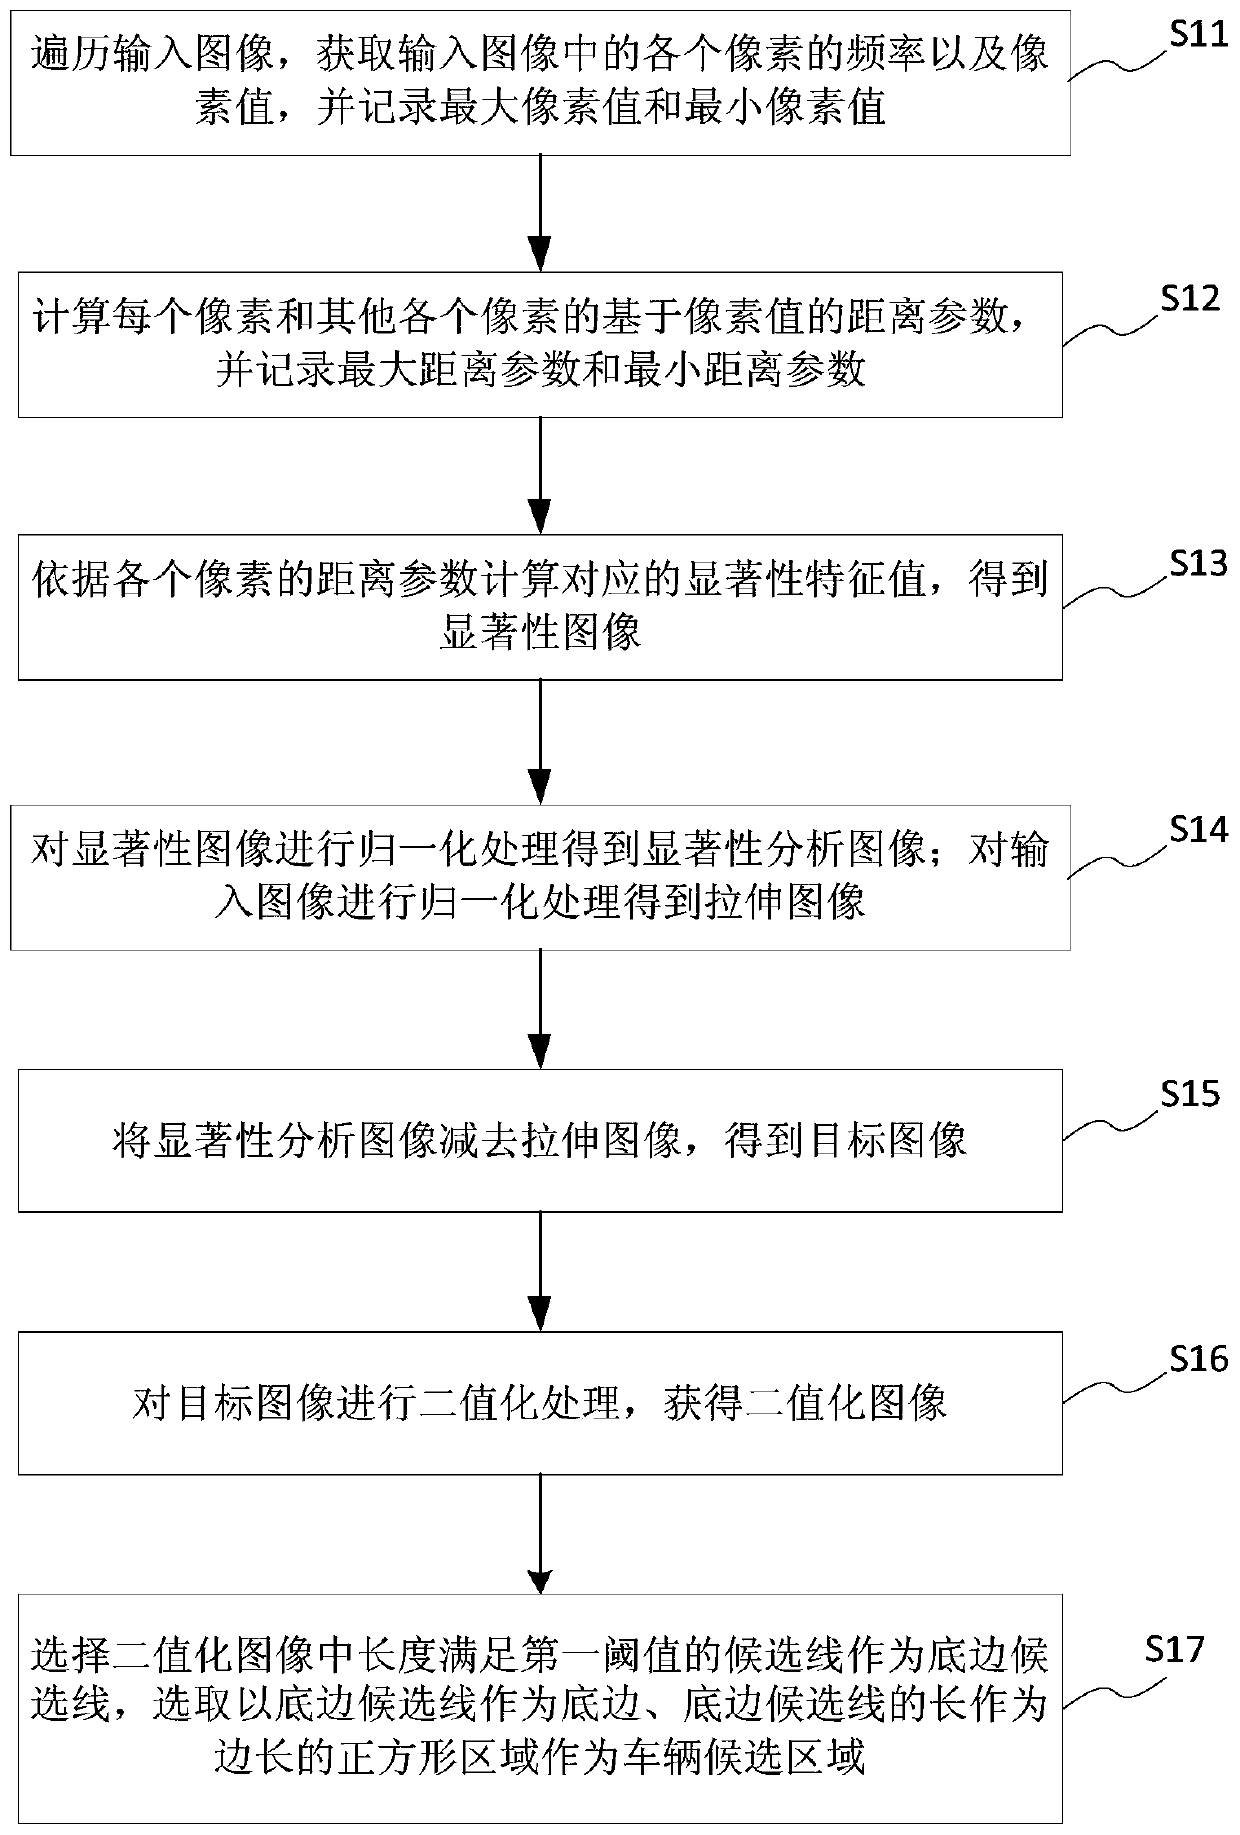 A vehicle detection method and system